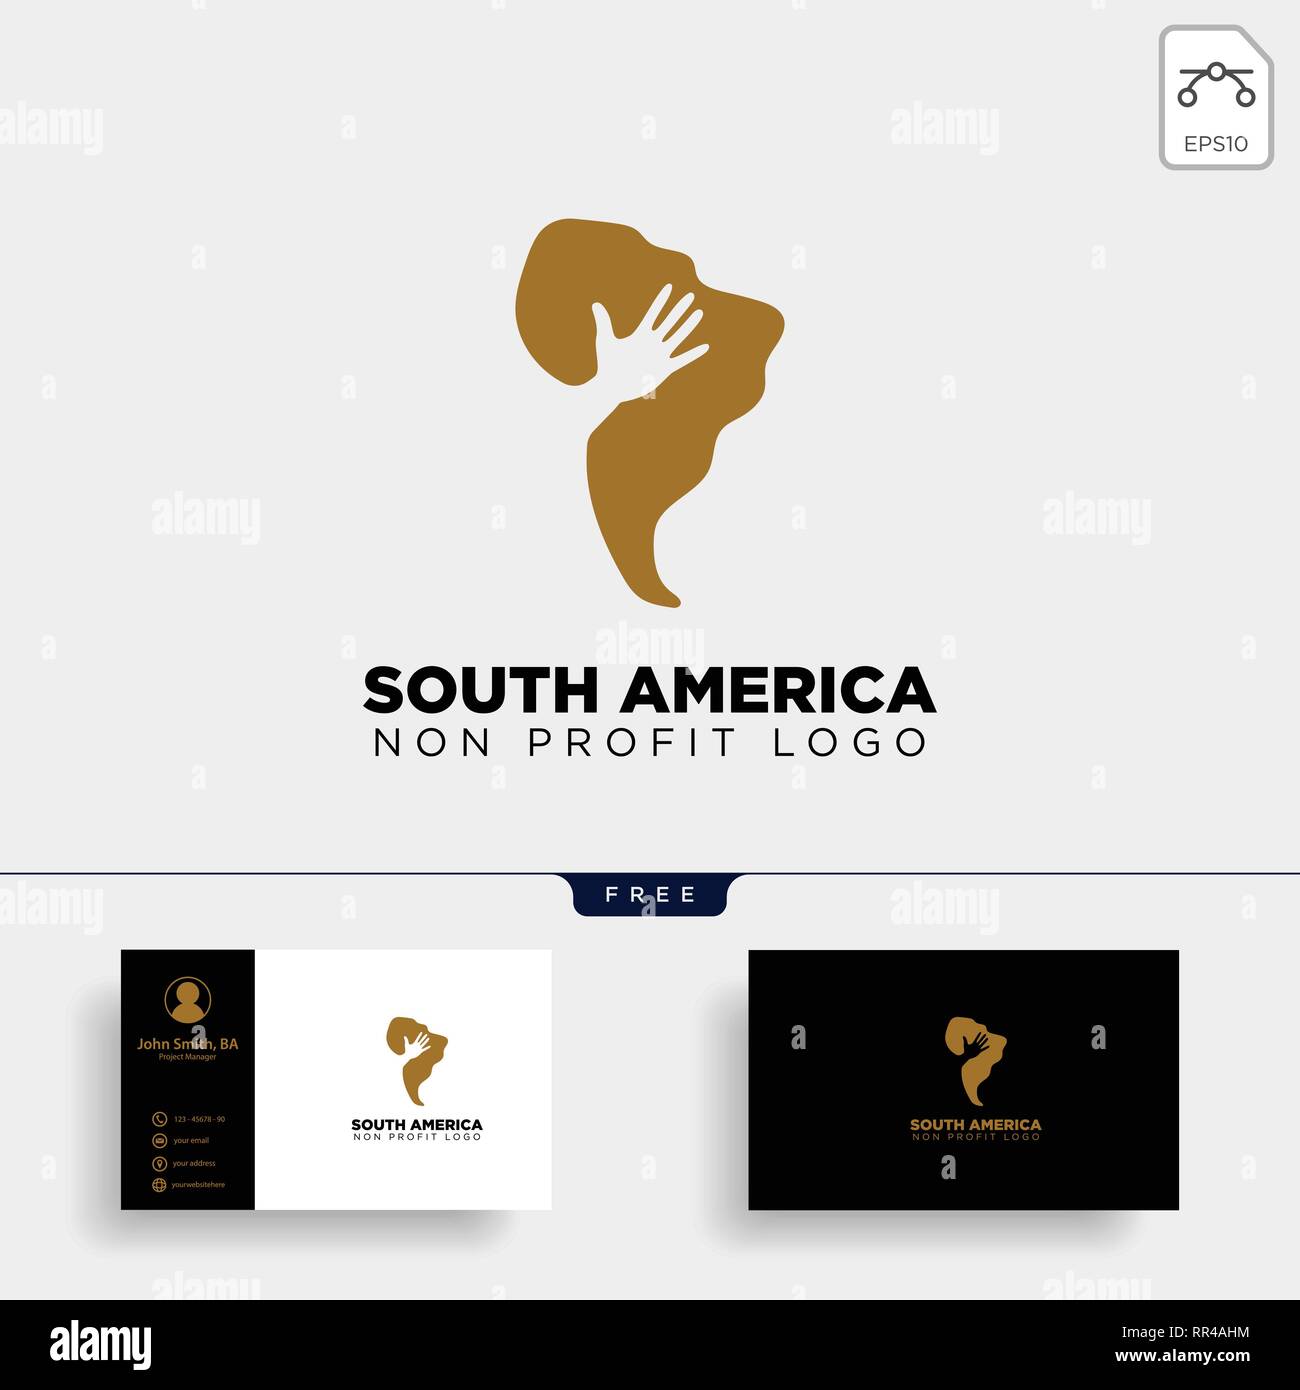 South Africa Charity Logo Template Vector Illustration Icon